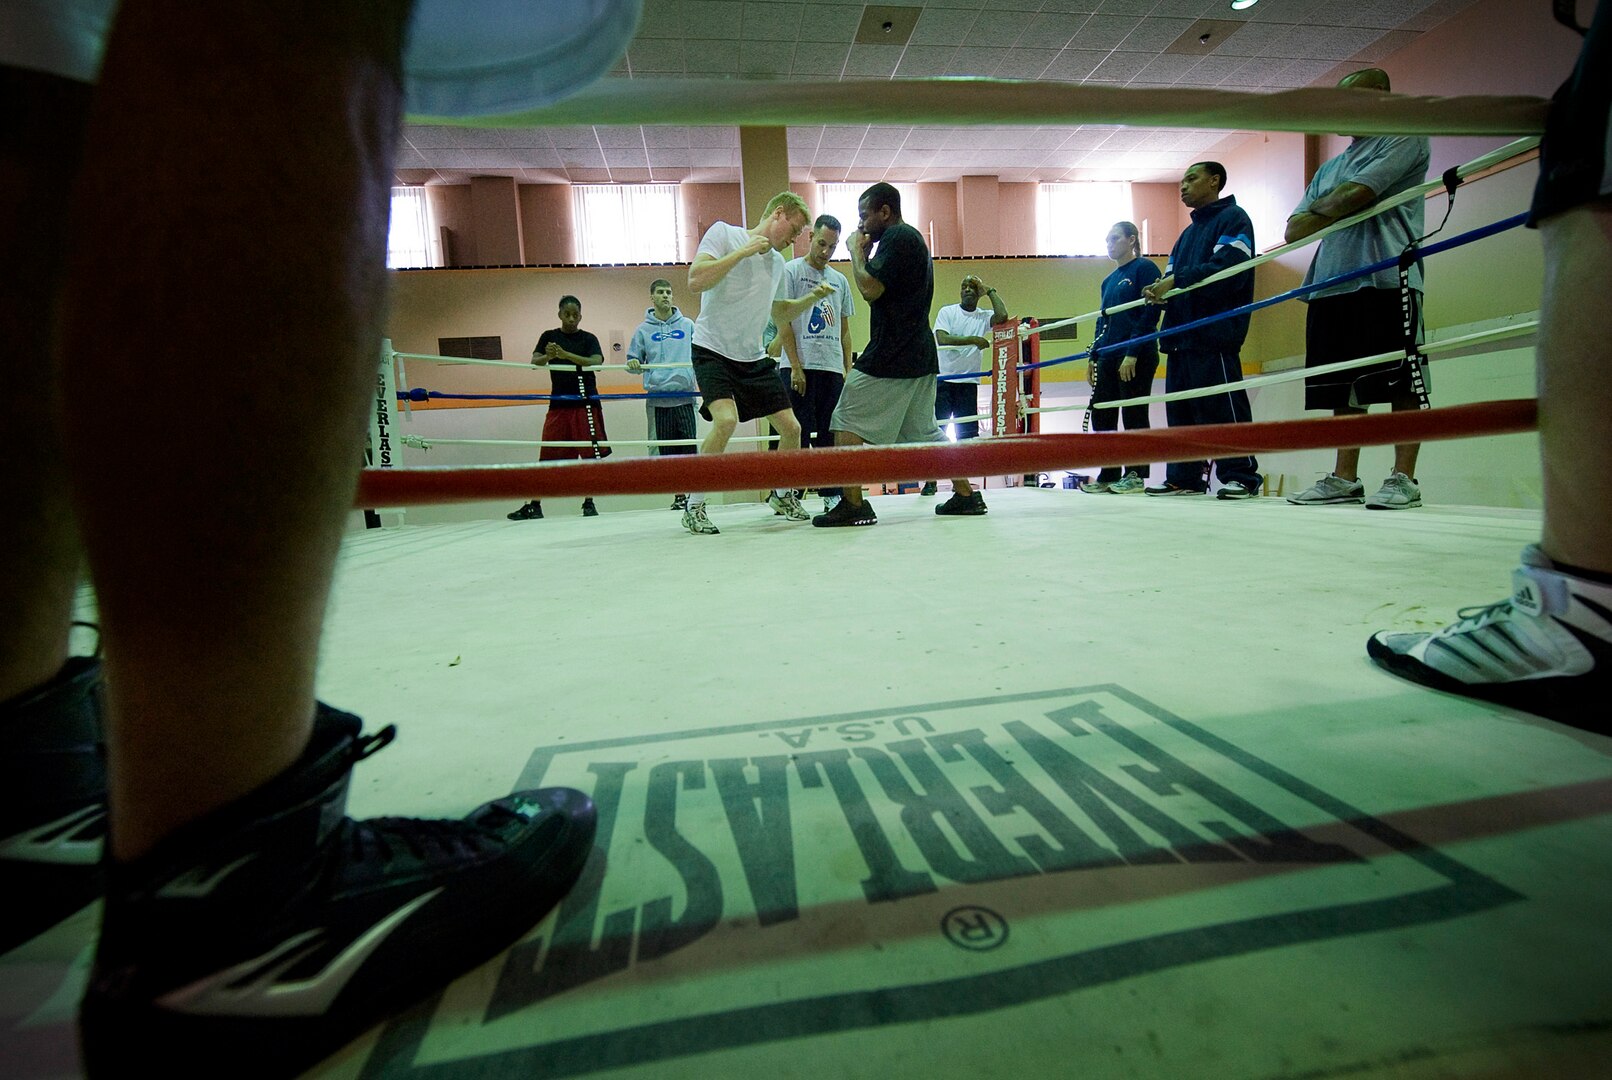 Air Force boxing team hopefuls Jarrett Johnson and James Beck work on delivering body blows while boxing coach Steven Franco oversees the service-wide camp March 23. (U.S. Air Force photo/Senior Airman Christopher Griffin)